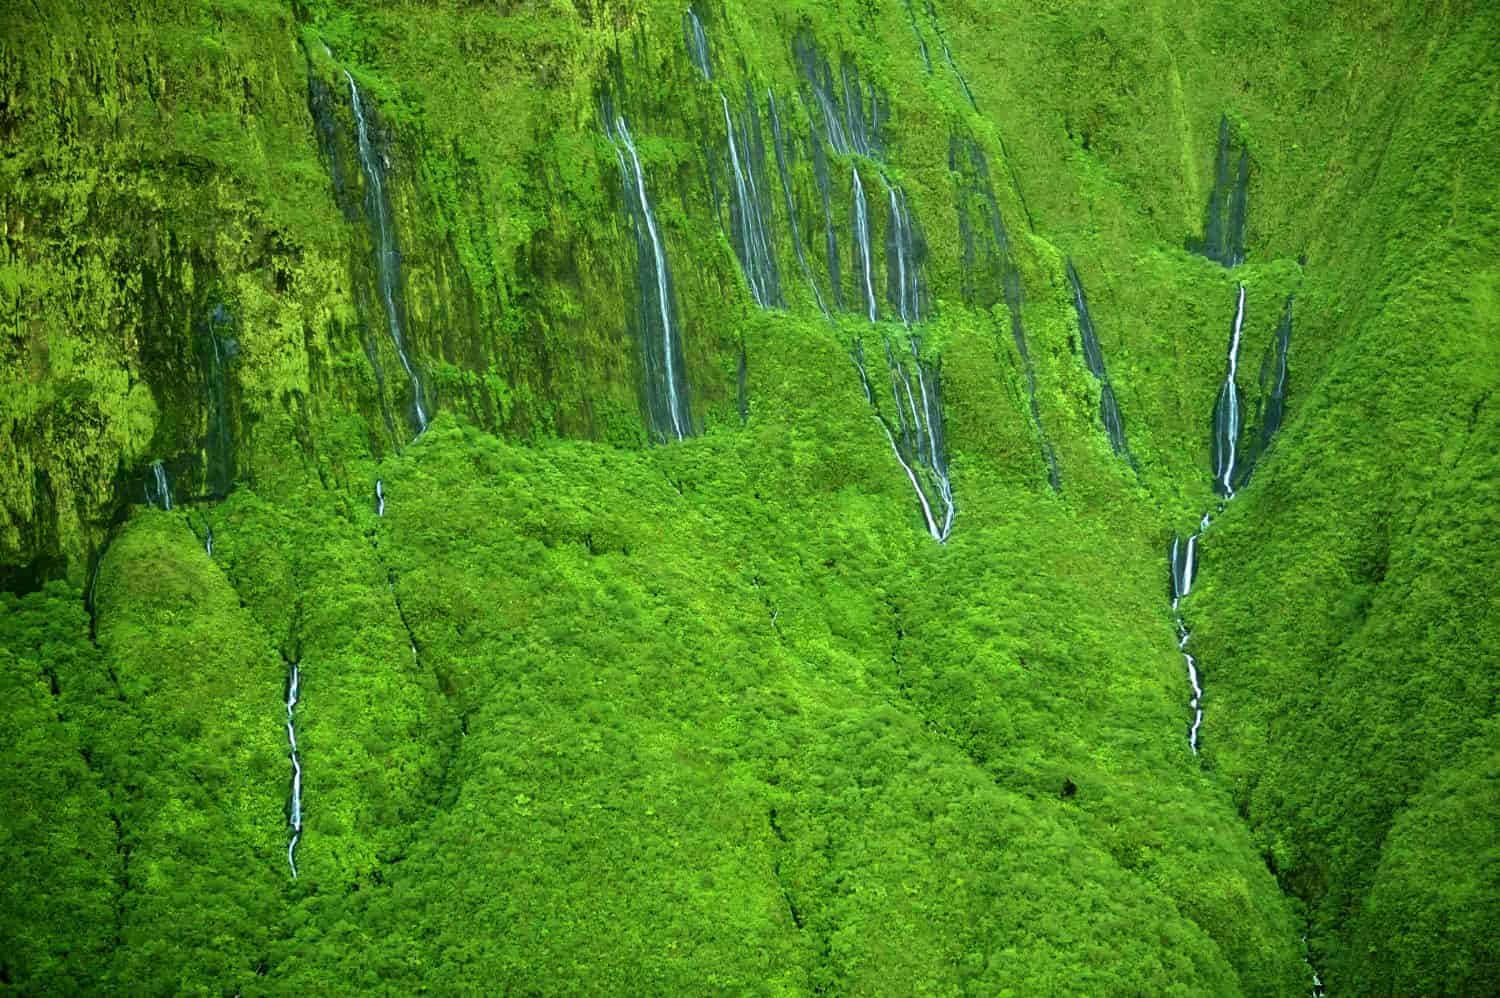 The 'Wall of Tears' has over 17 waterfalls flowing at once - Maui, Hawaii